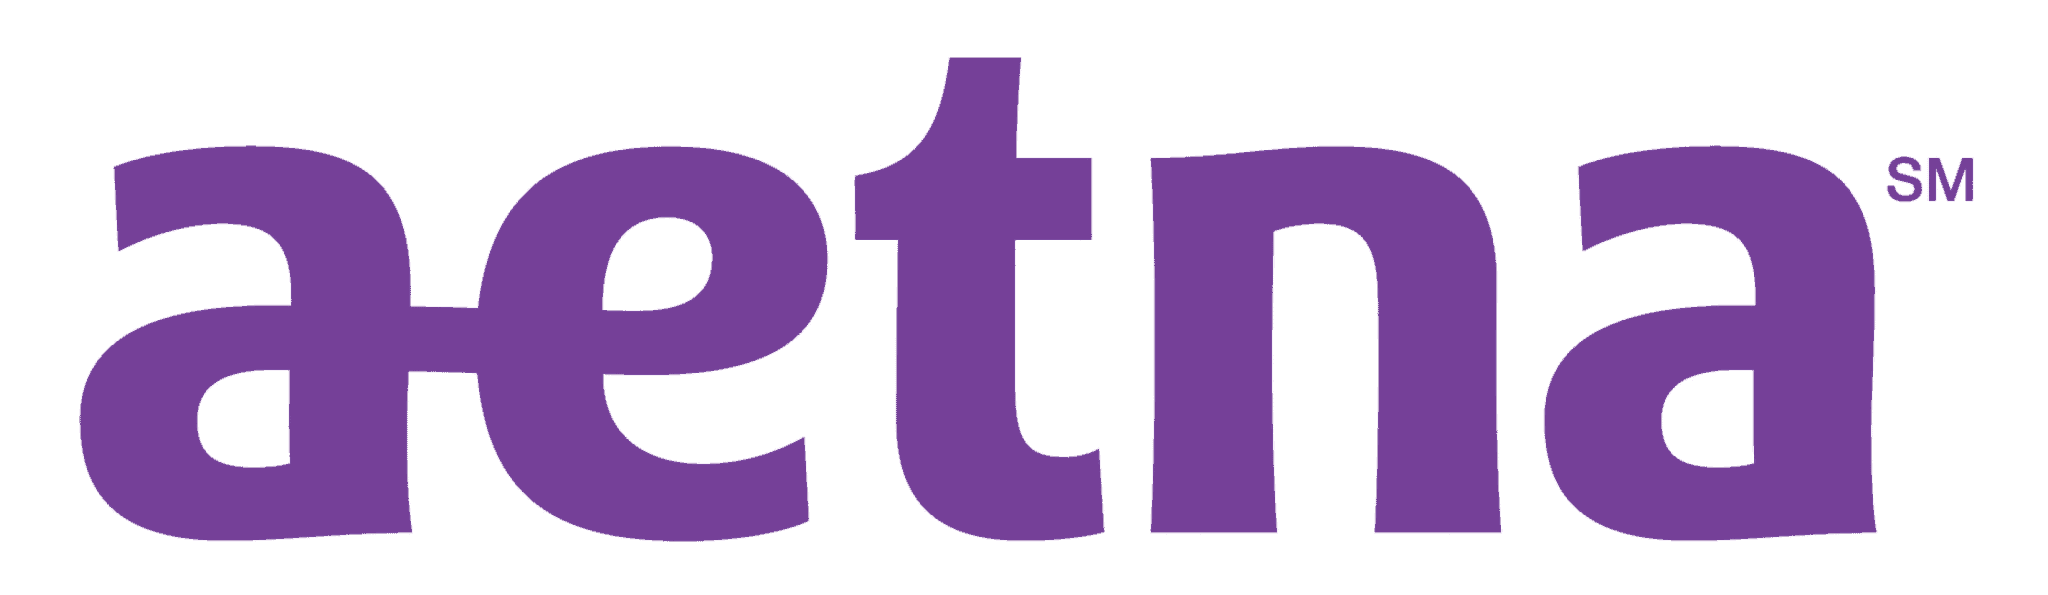 aetna color